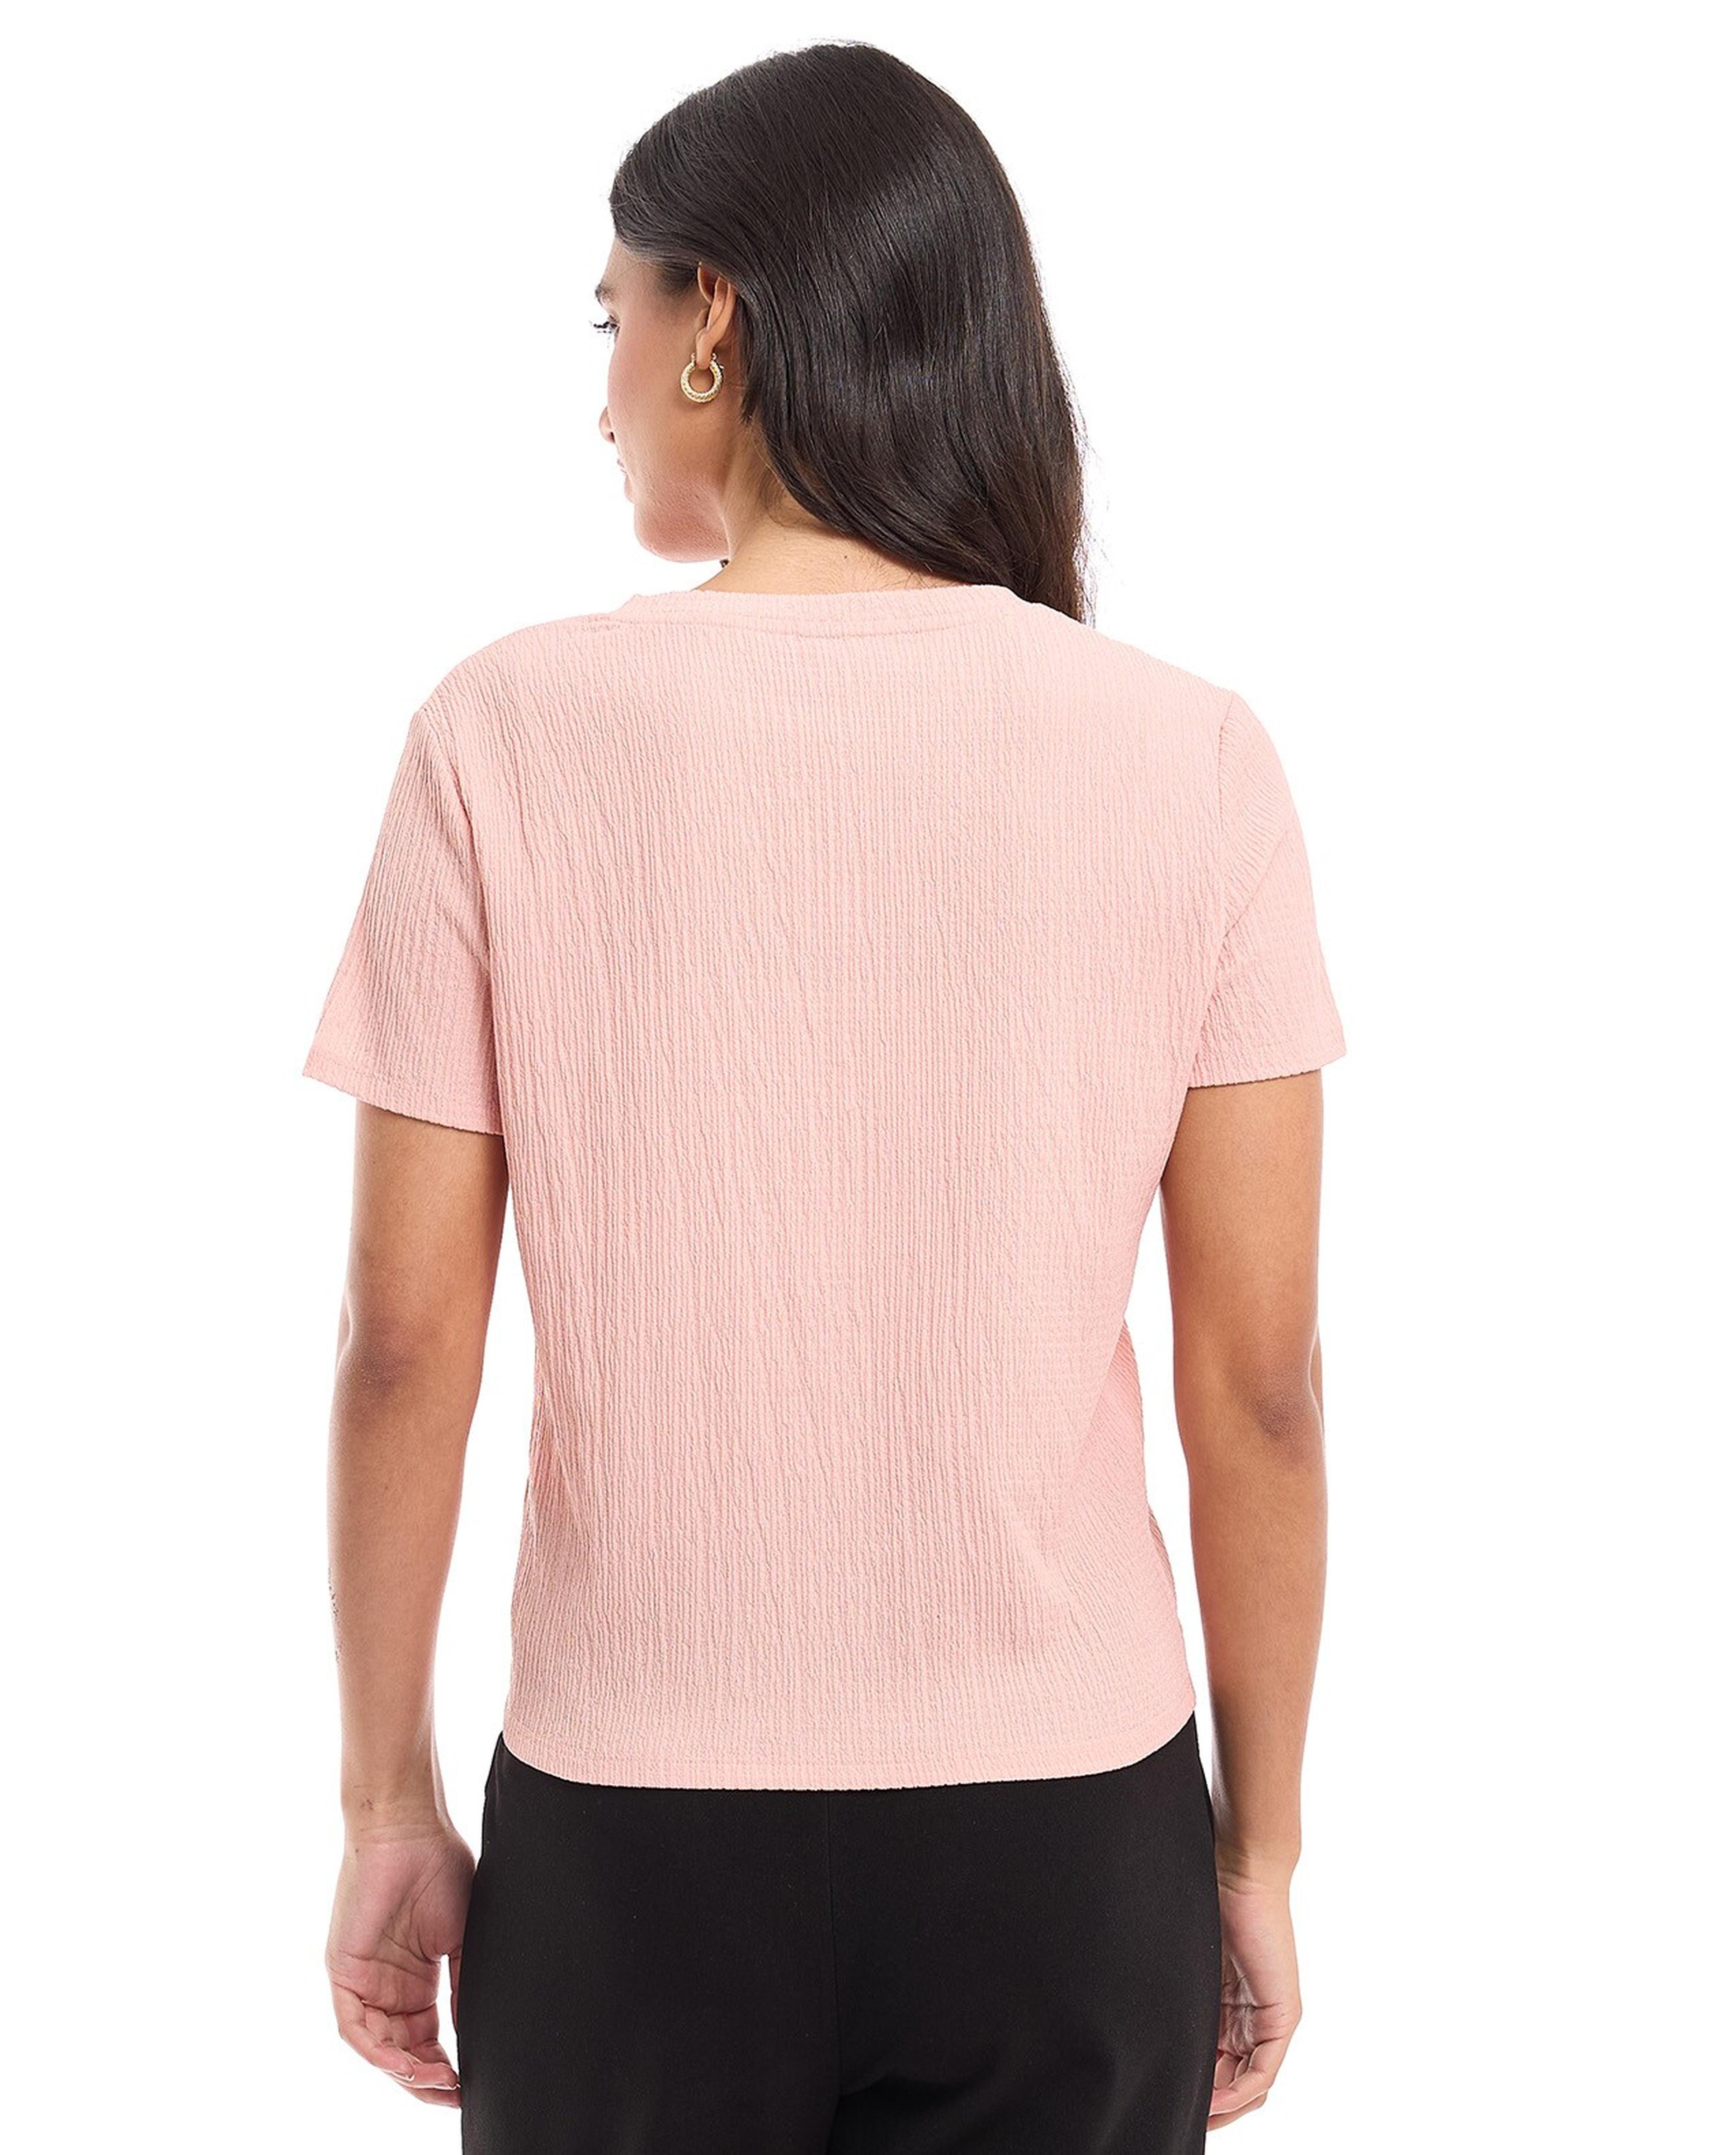 Textured Top with V-Neck and Short Sleeves